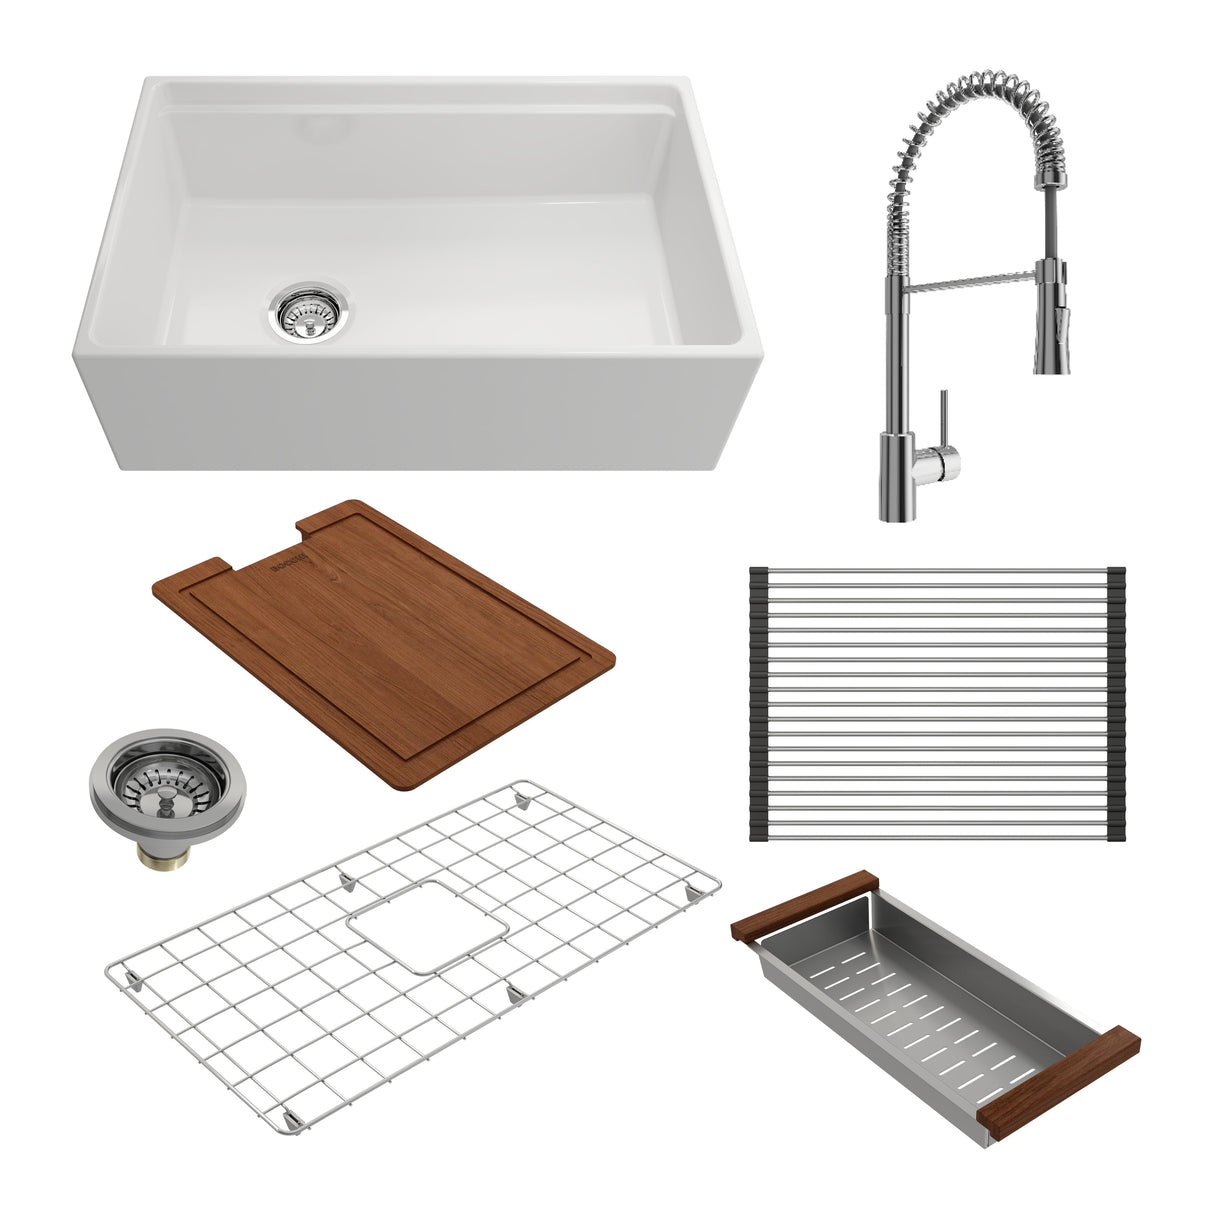 BOCCHI 1344-001-2020CH Kit: 1344 Contempo Step-Rim Apron Front Fireclay 30 in. Single Bowl Kitchen Sink with Integrated Work Station & Accessories w/ Livenza 2.0 Faucet